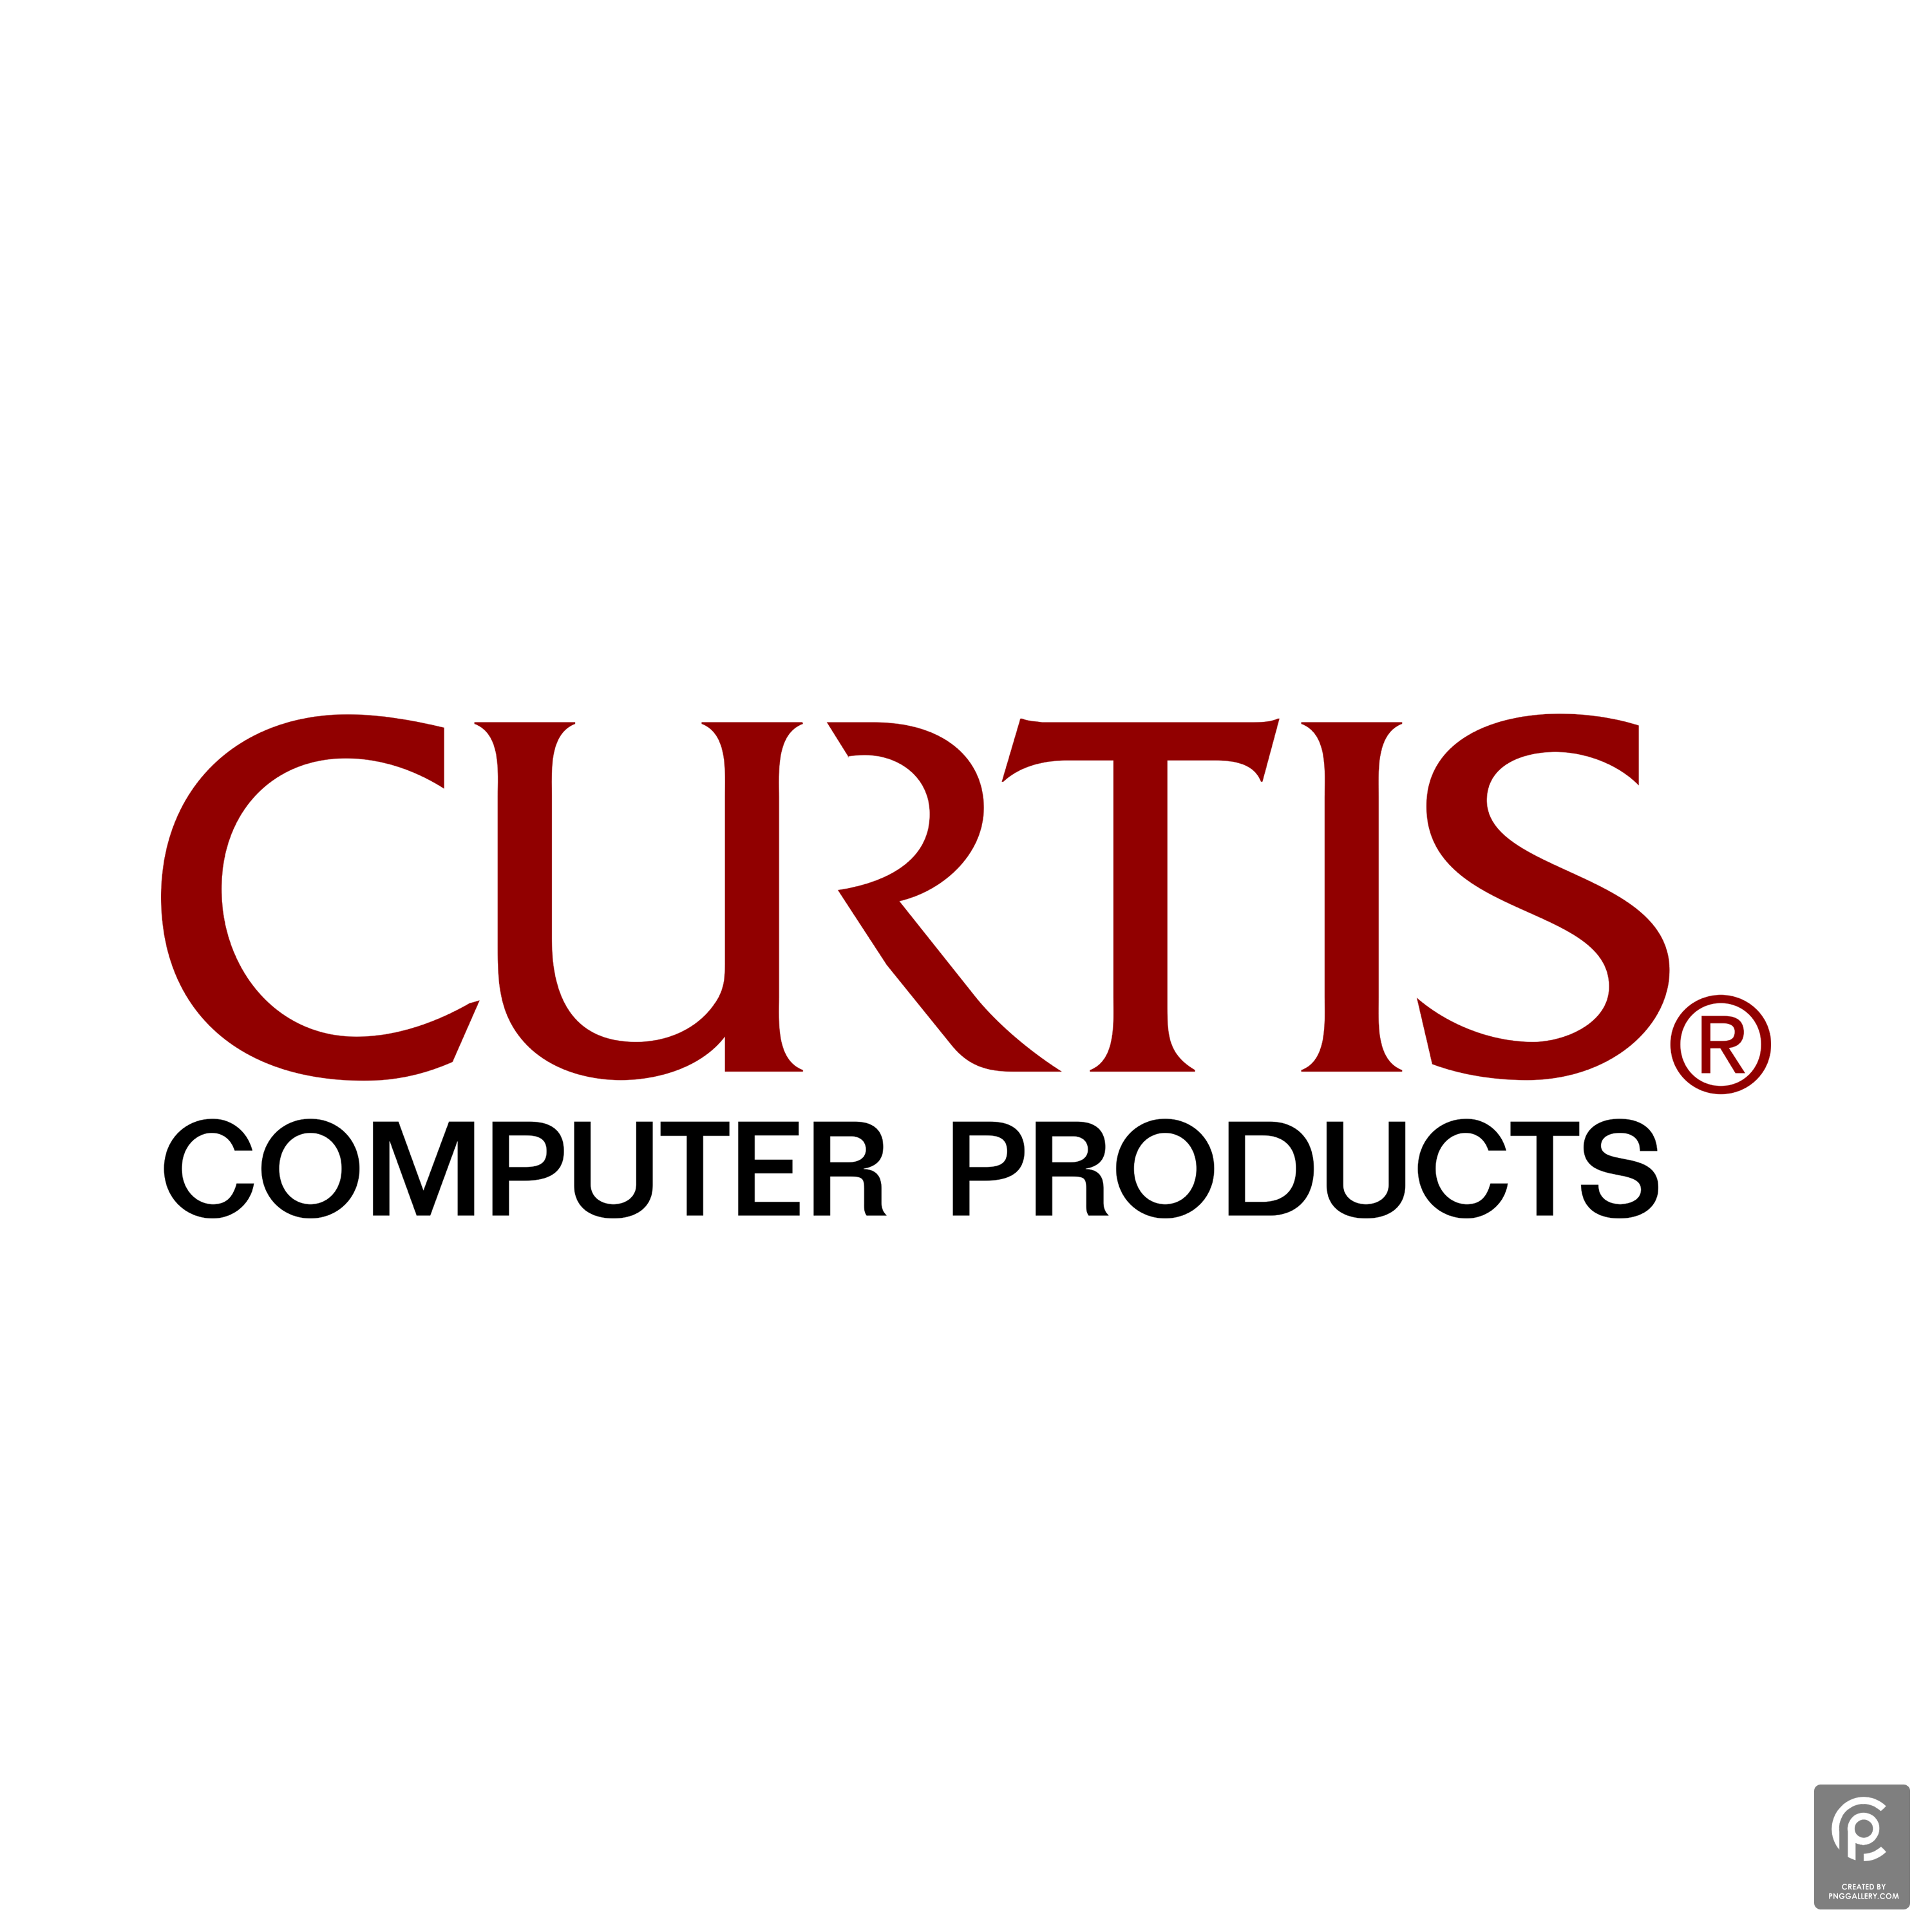 Curtis Computer Products Logo Transparent Gallery